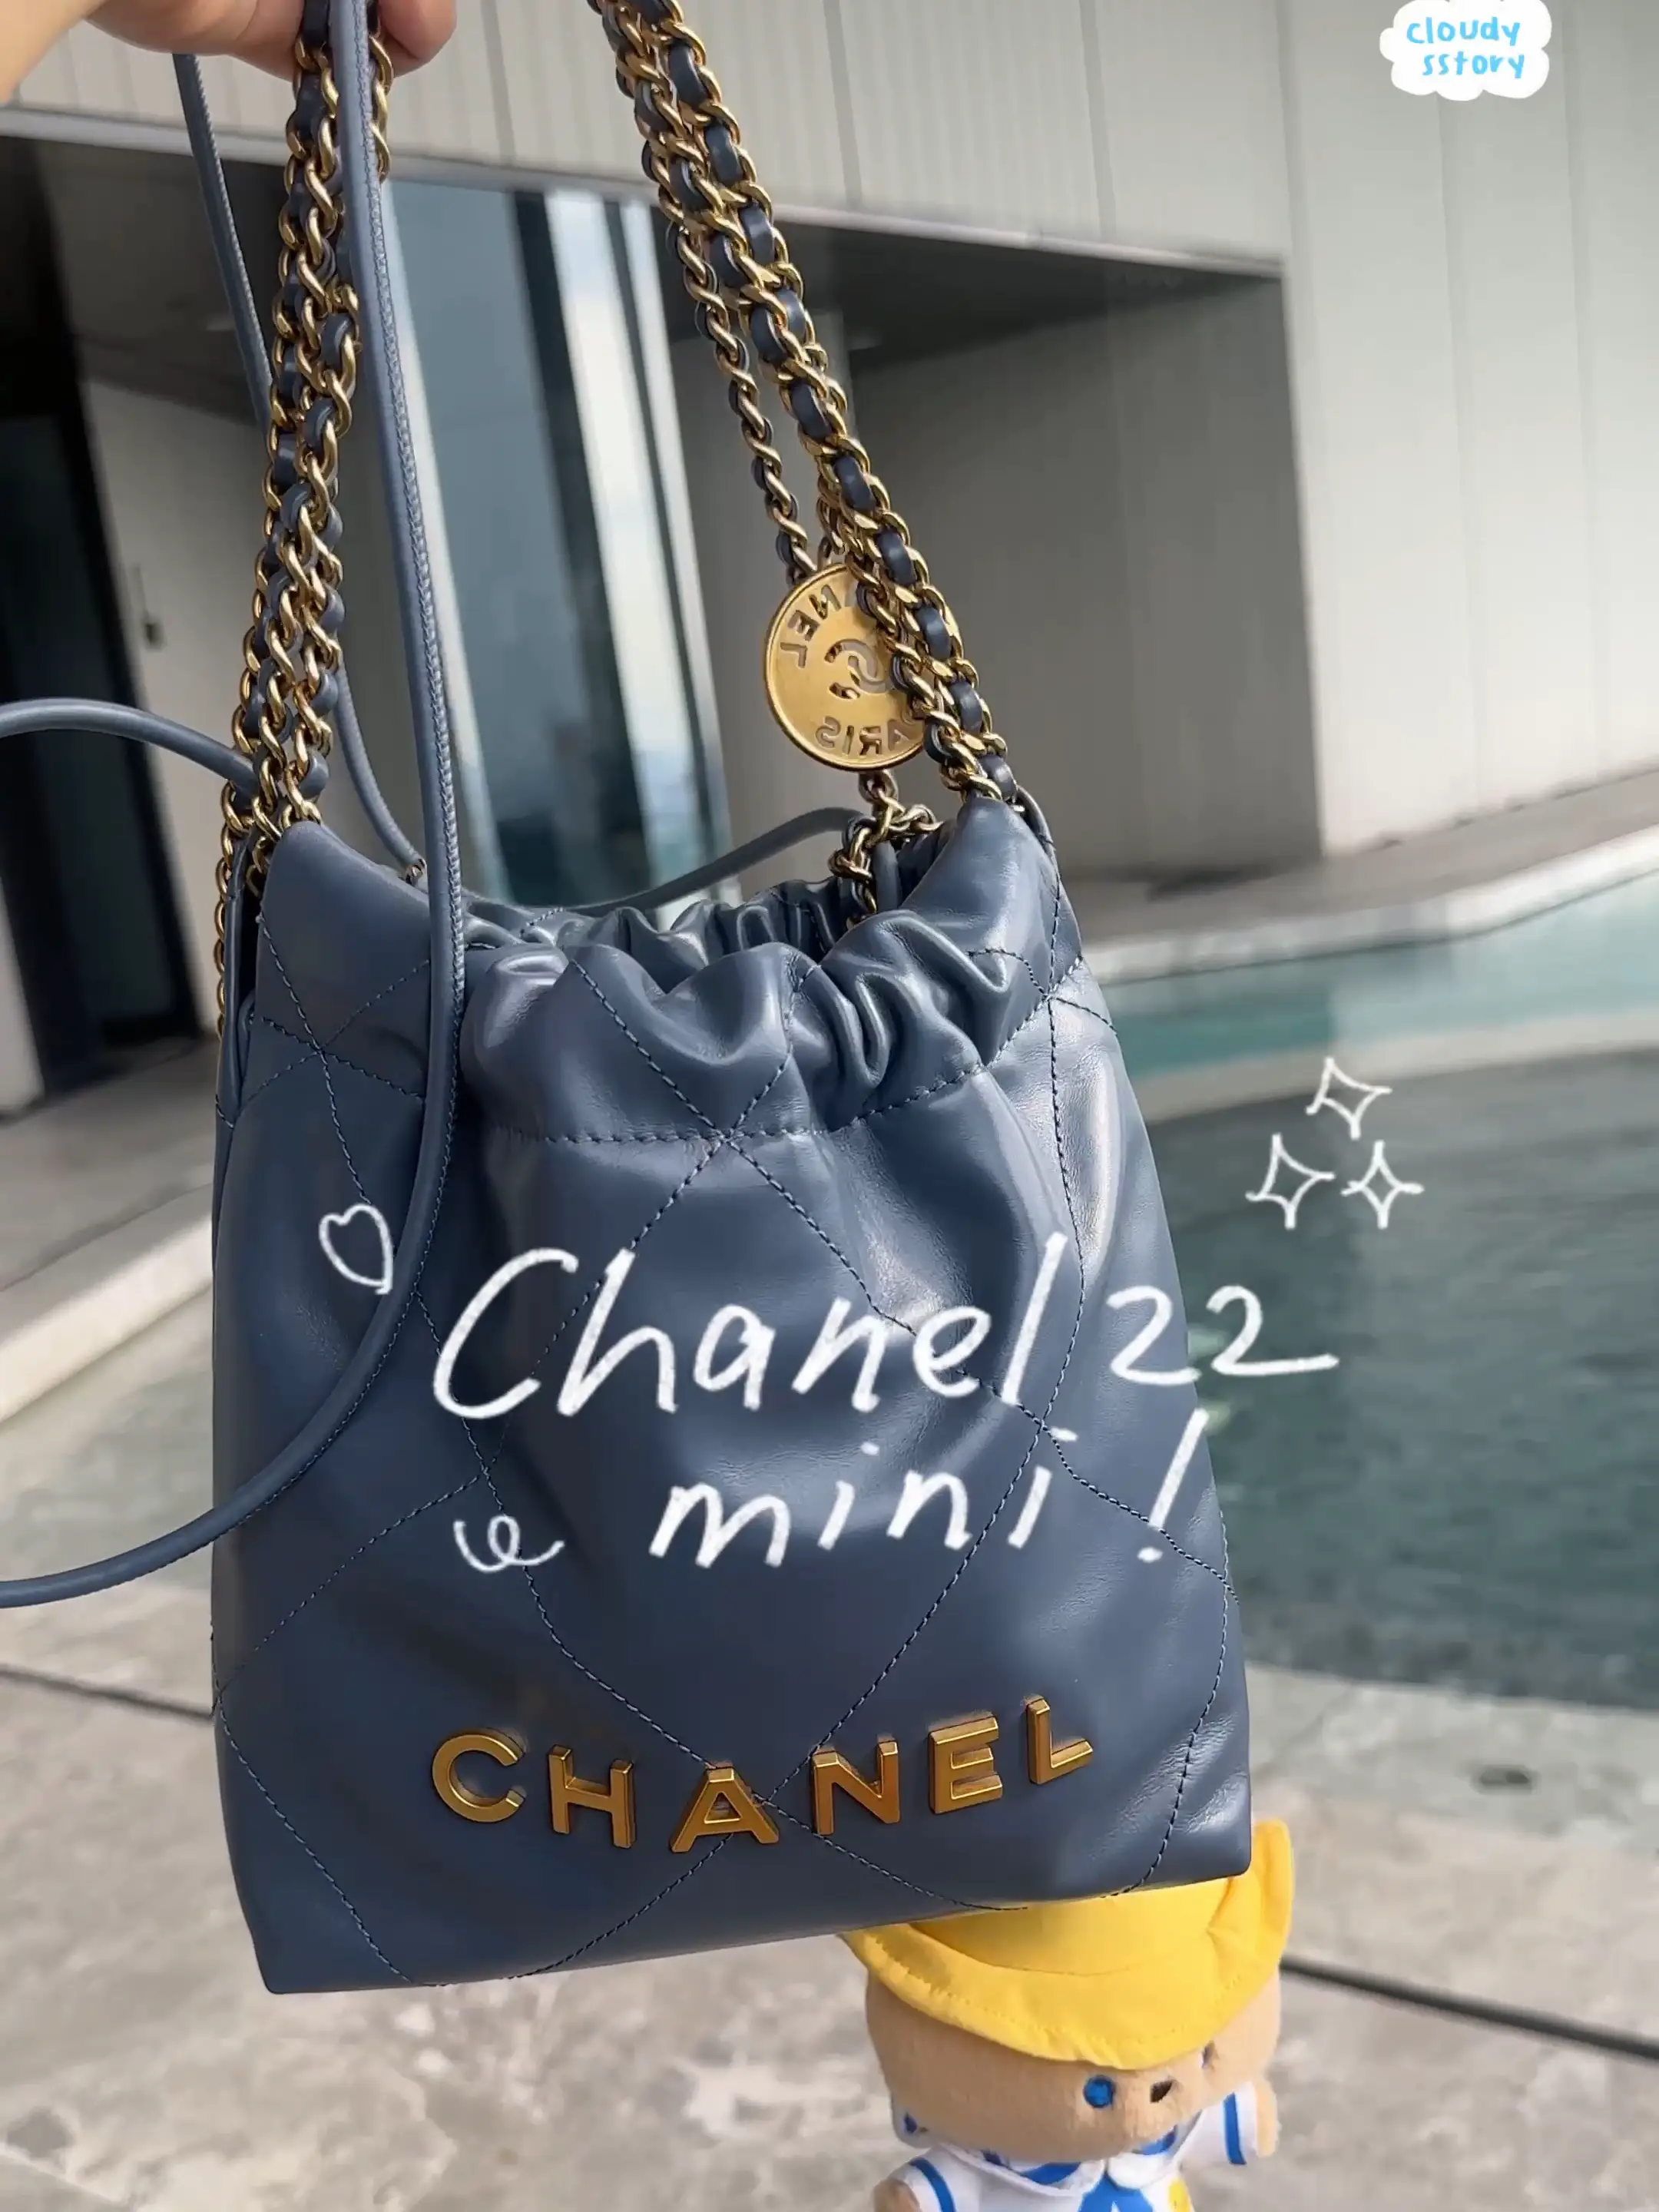 Should the chanel22 mini bag be pounded? 💌, Video published by  cloudysstory